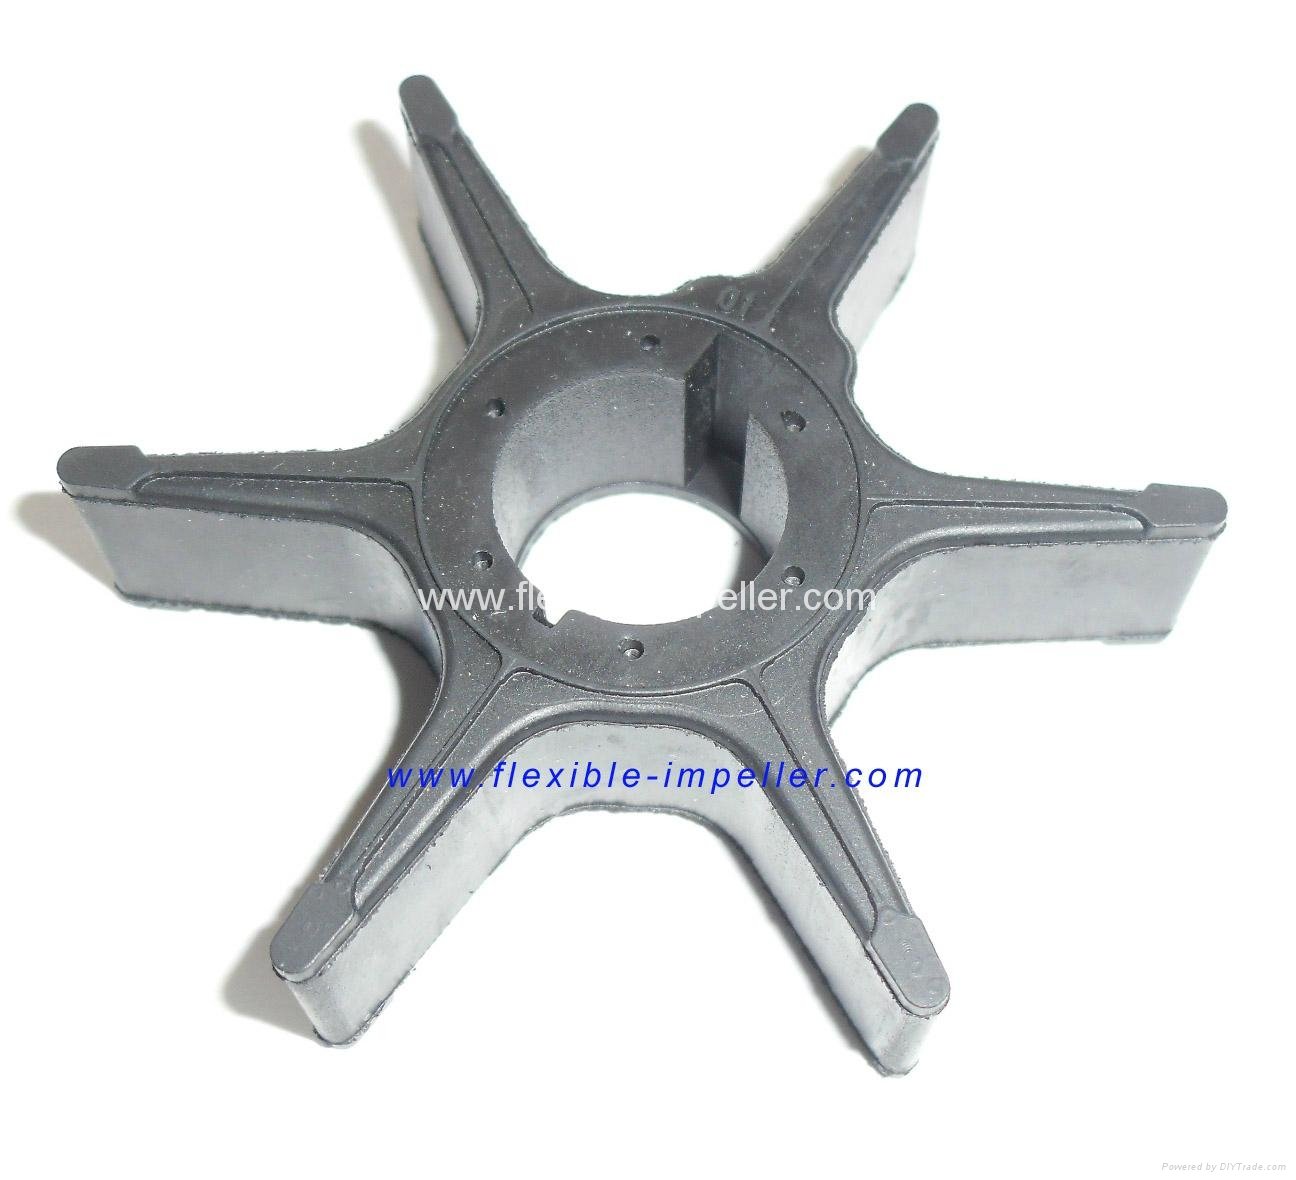 Flexible Impelelr for SUZUKI 17461-96301 and 17461-96311 and 17461-96312